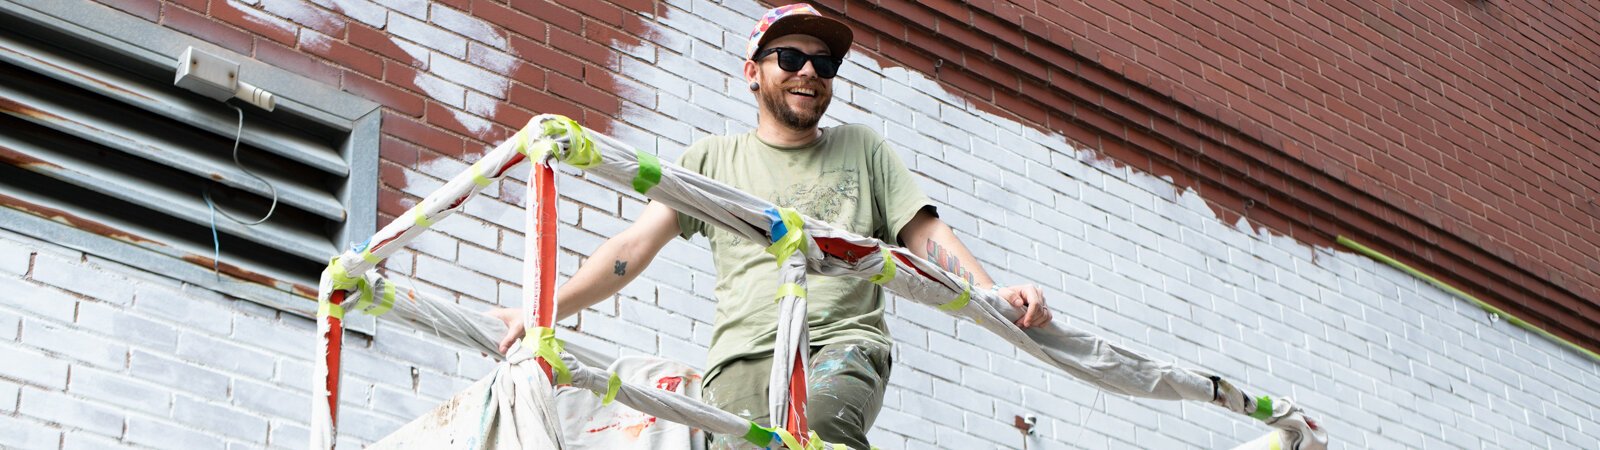 World-famous muralist Arlin Graff begins his mural on the Shindigz building at 919 South Harrison St. in Downtown Fort Wayne.